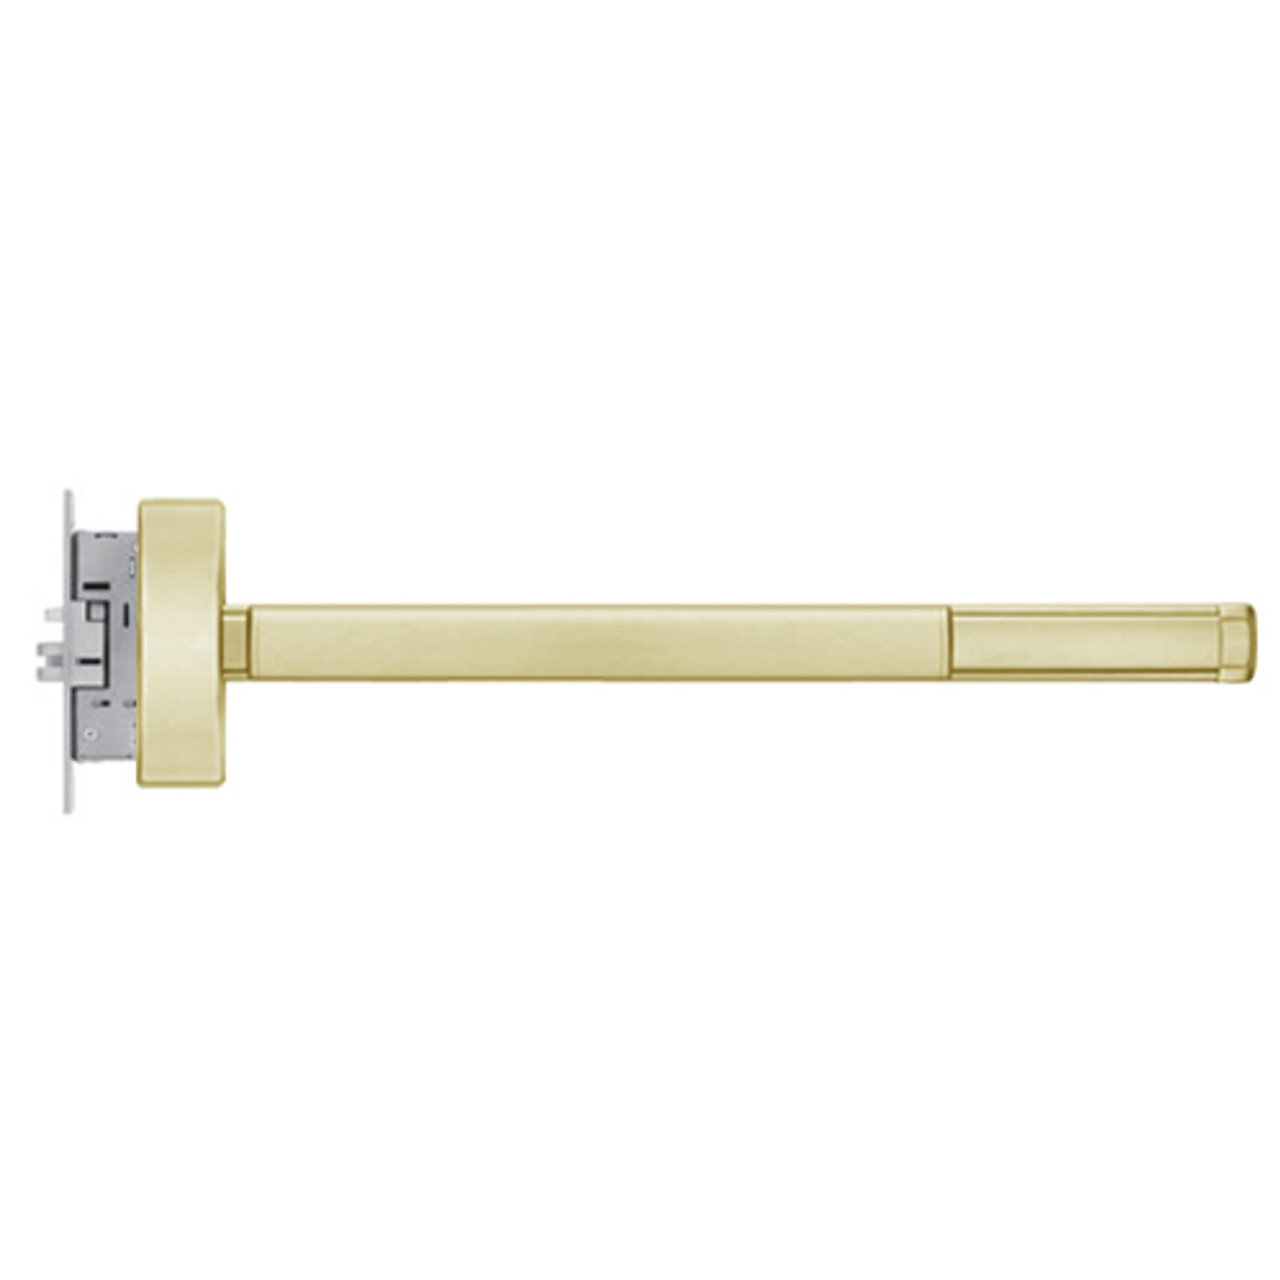 MLR2314-RHR-606-36 PHI 2300 Series Apex Mortise Exit Device with Motorized Latch Retraction Prepped for Lever-Knob Always Active in Satin Brass Finish